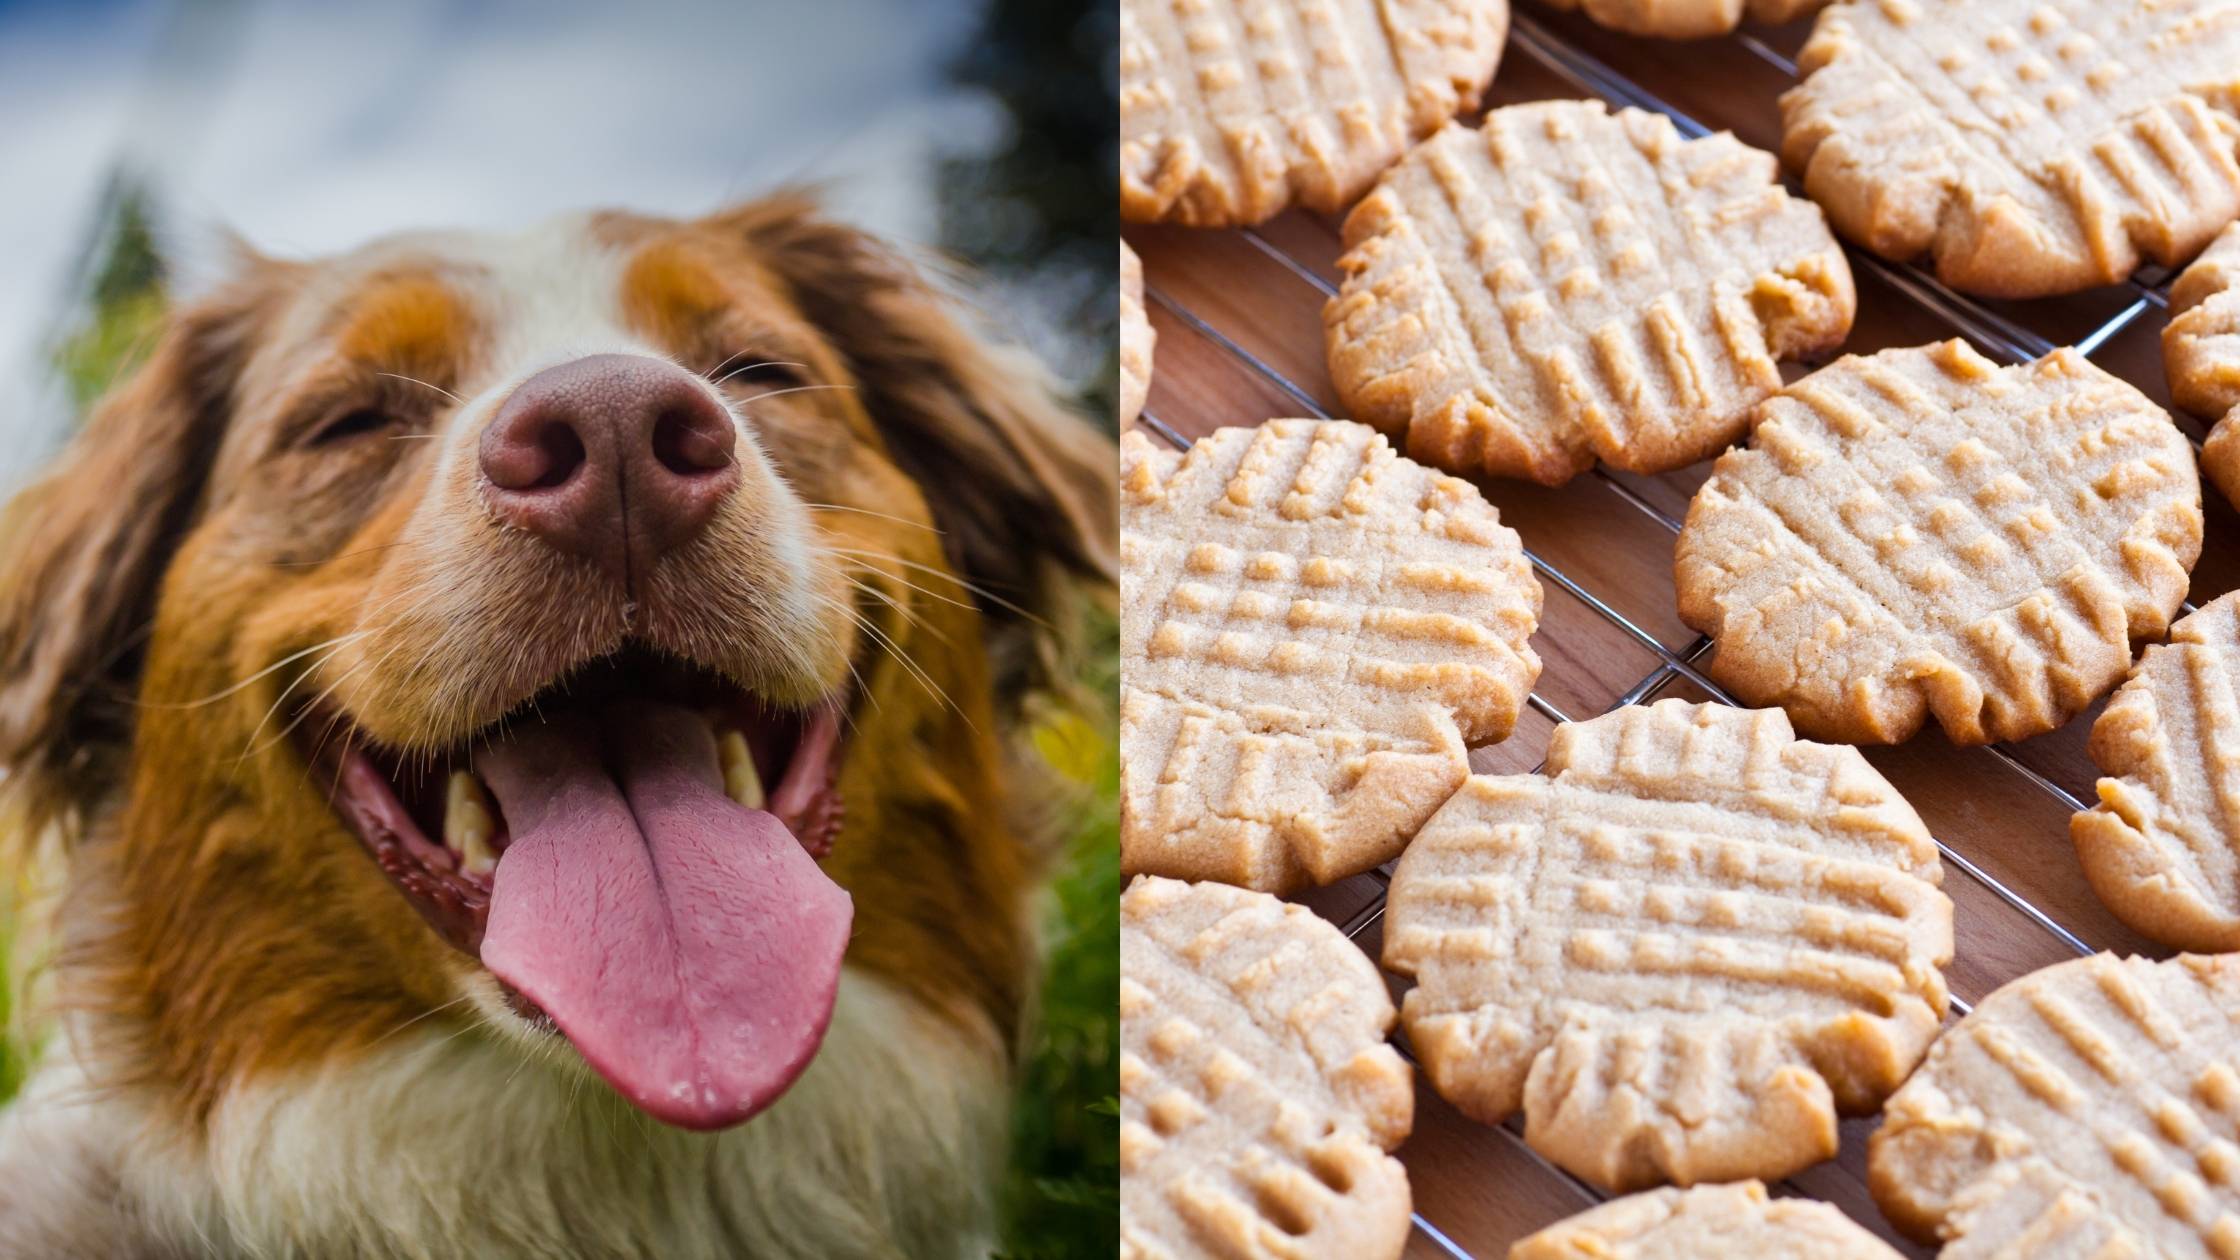 can dogs eat peanut butter cookies